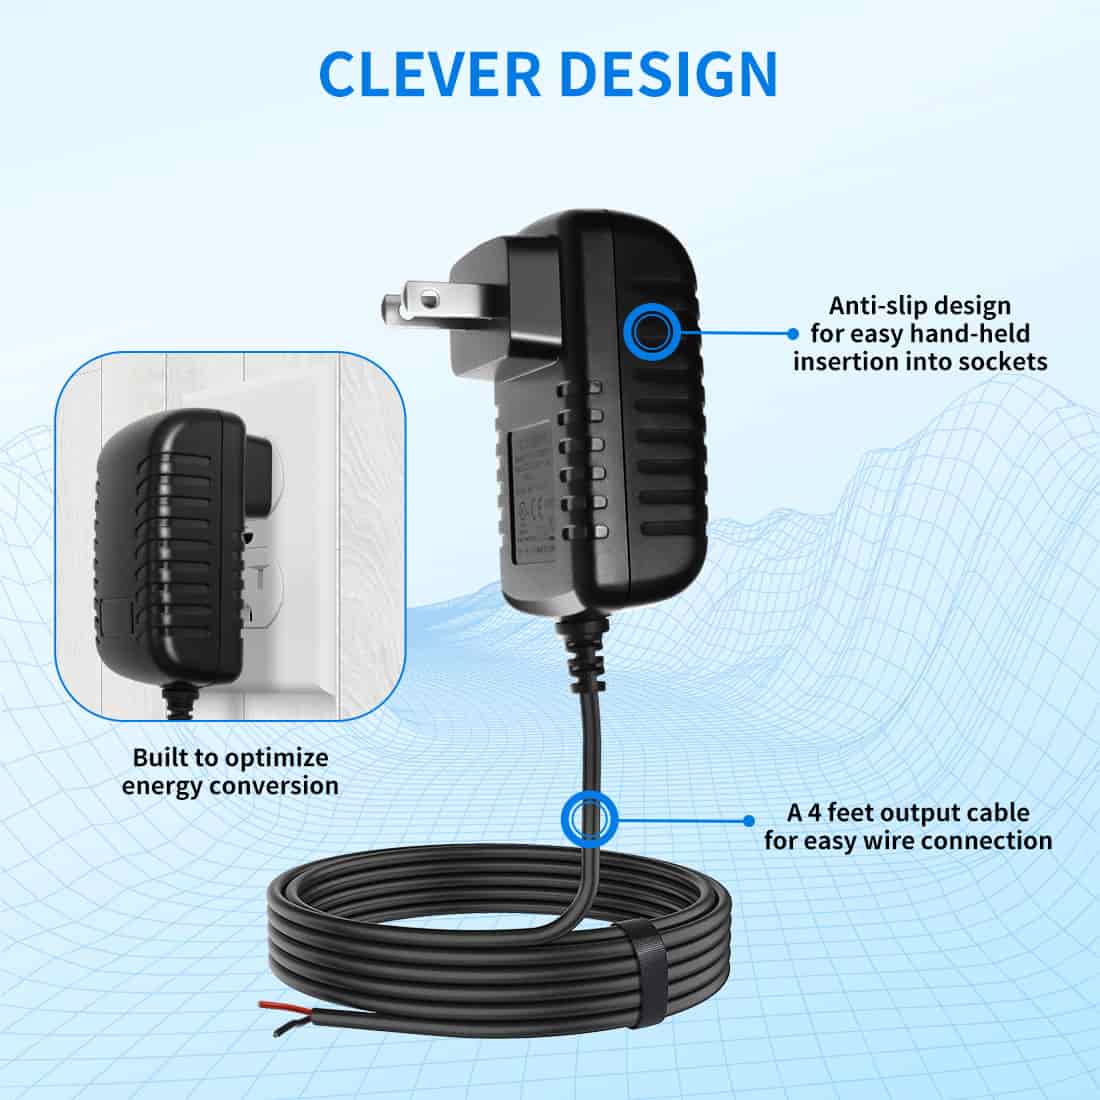 TS24-U AC to DC Adapter Clever Design